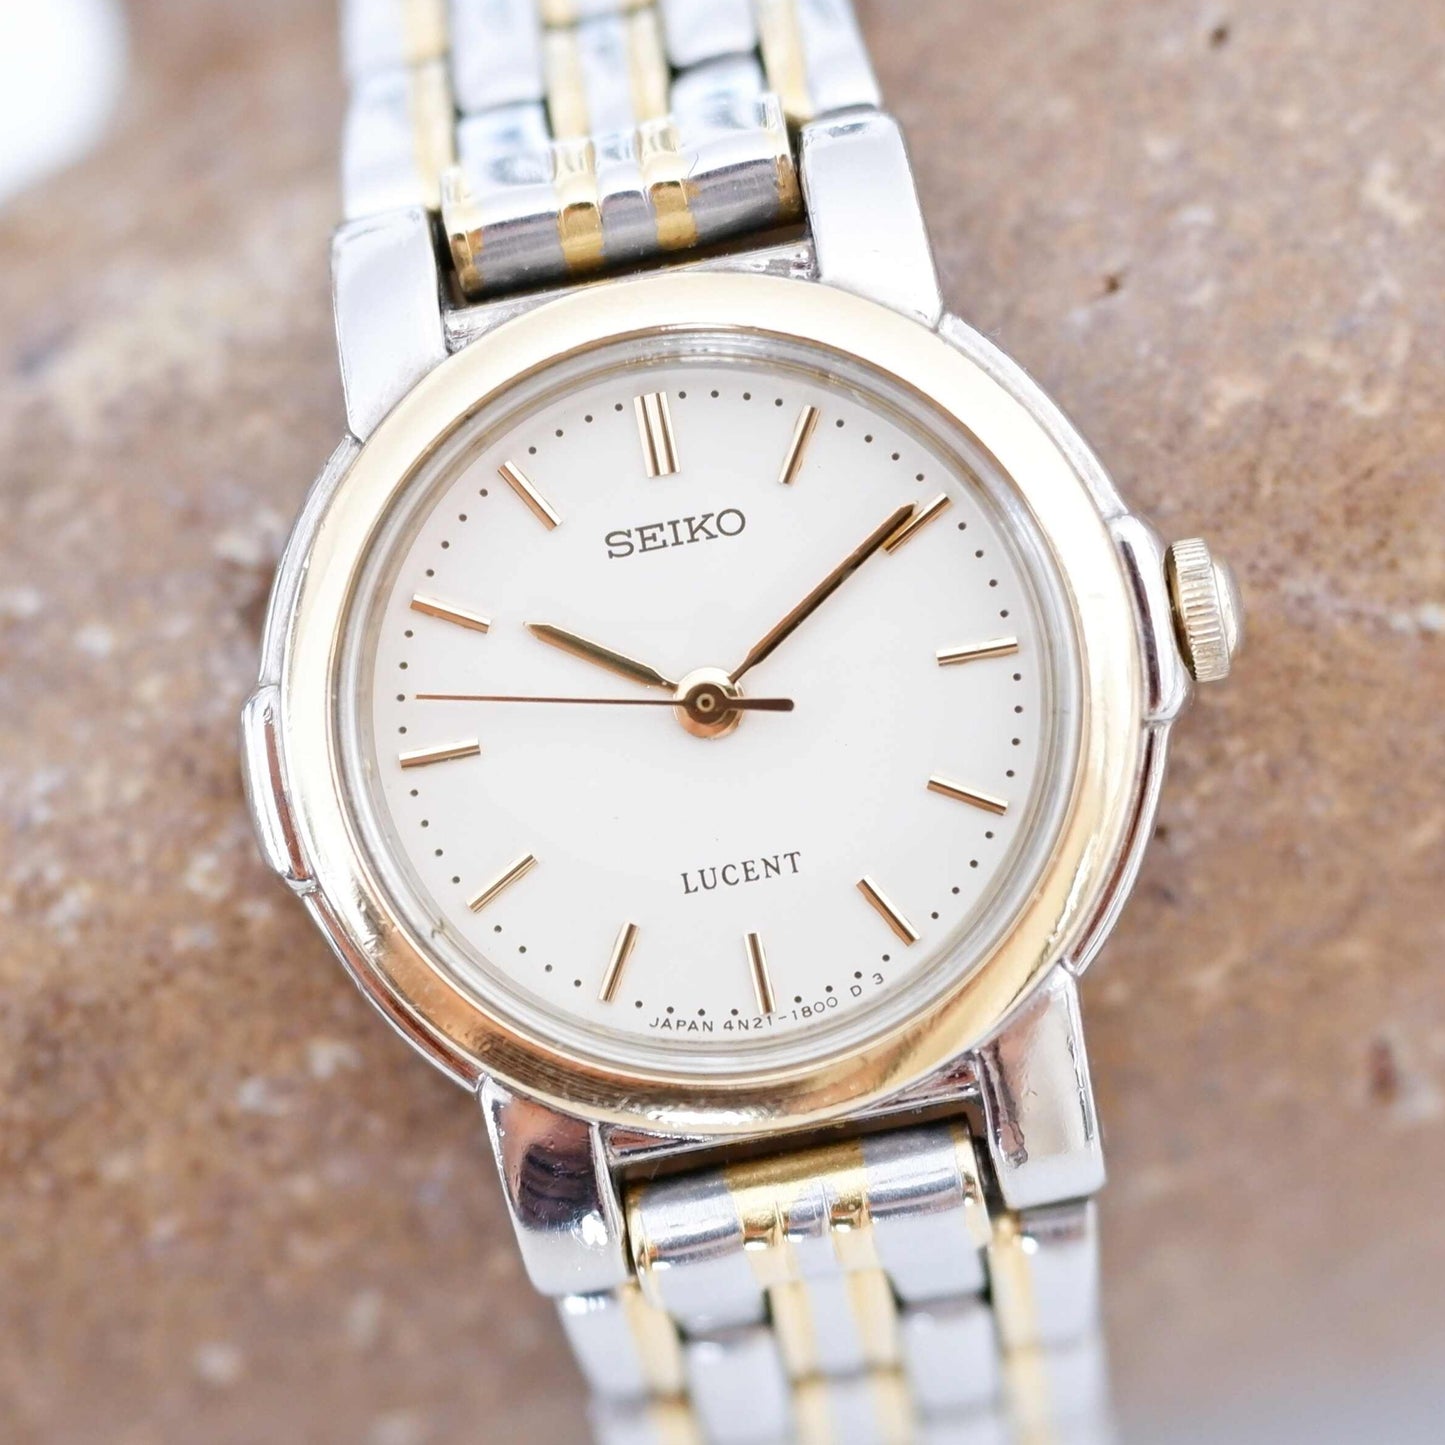 Seiko Lucent Vintage Ladies Watch, First Front Side